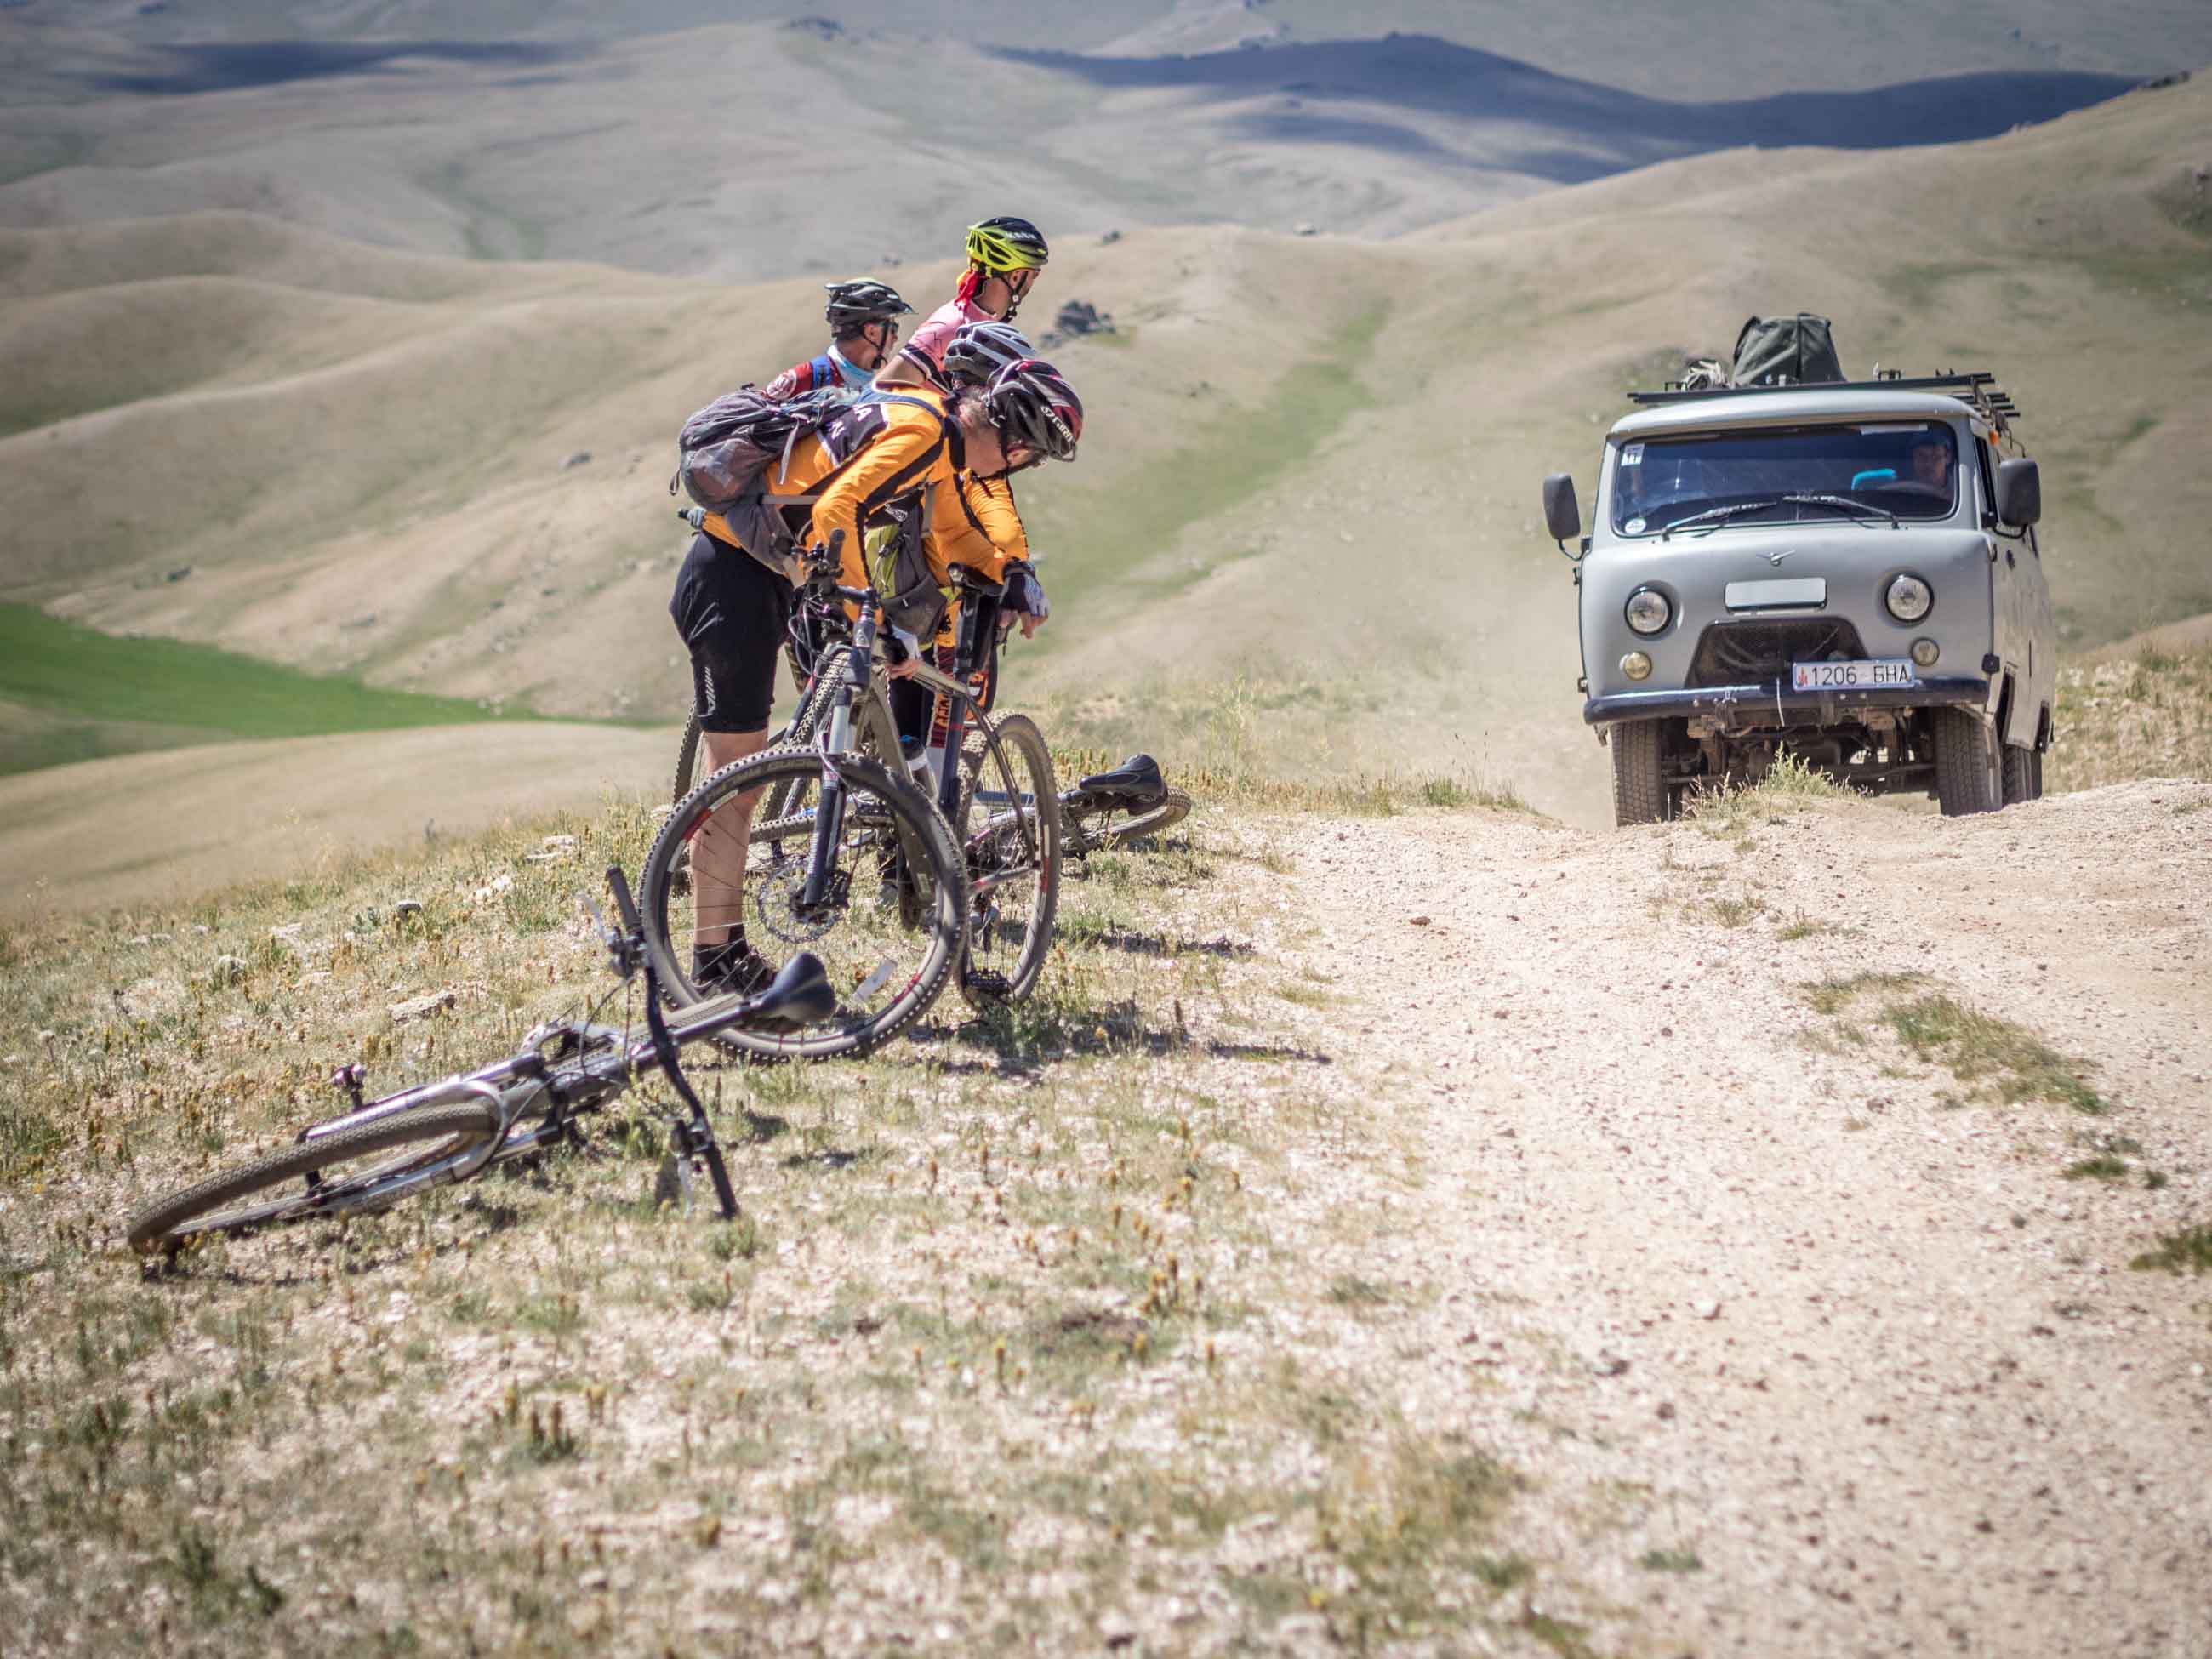 Russian truck as support vehicle on Mongolian cycling trip